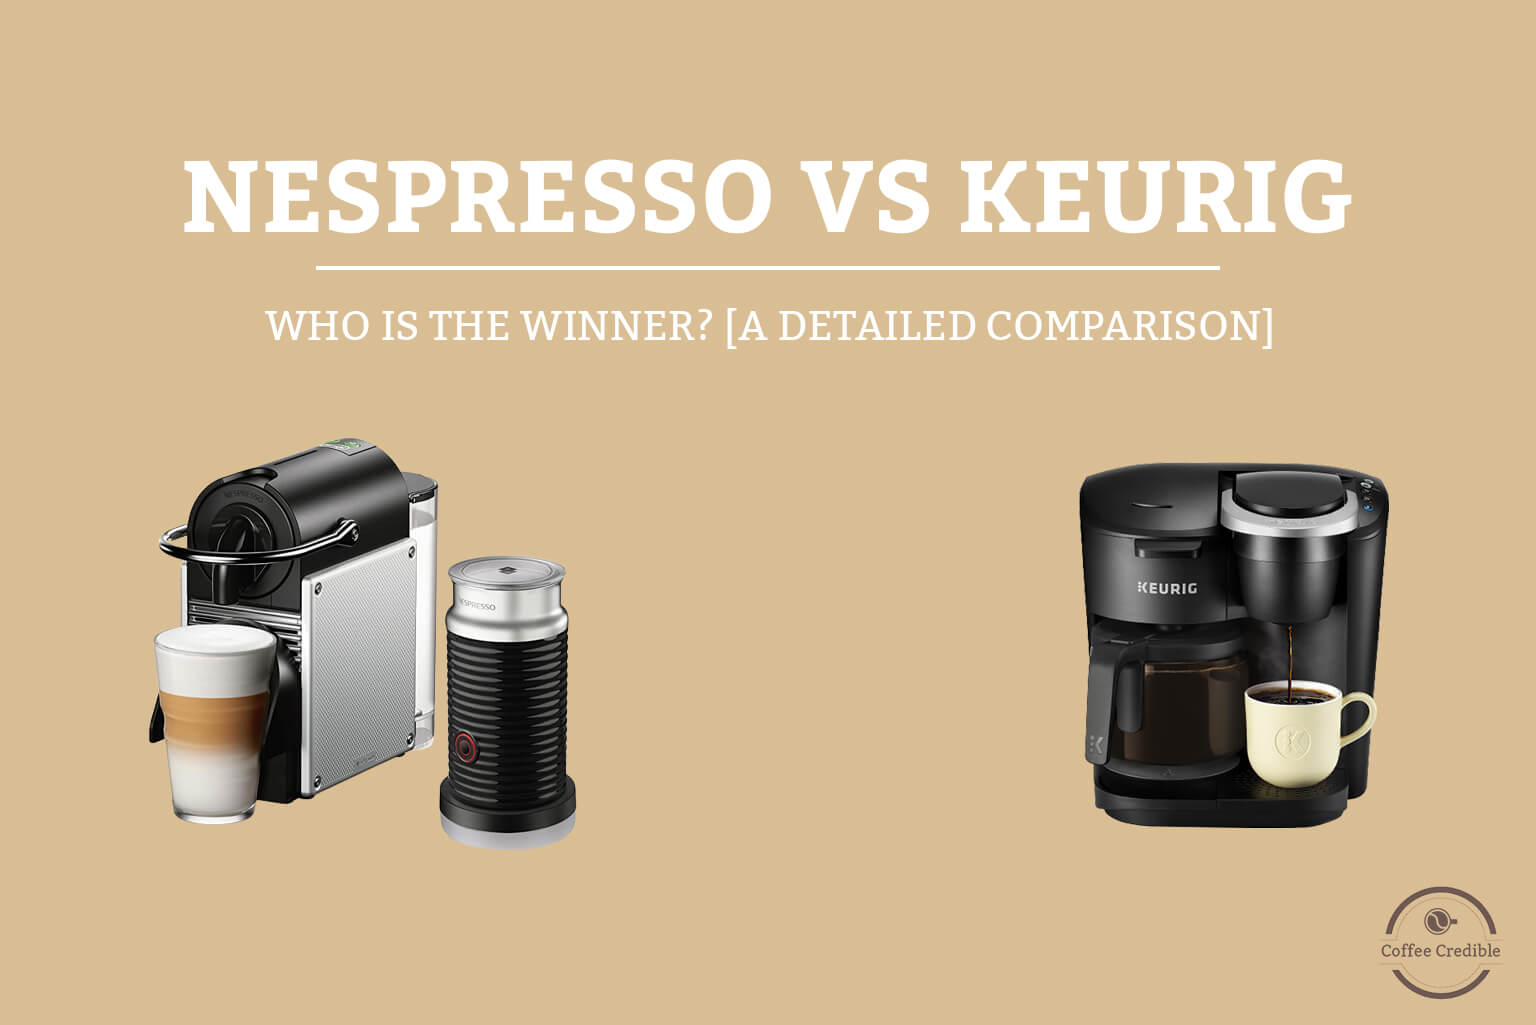 Nespresso vs. Keurig: Who Is the Winner? [A Detailed Comparison]